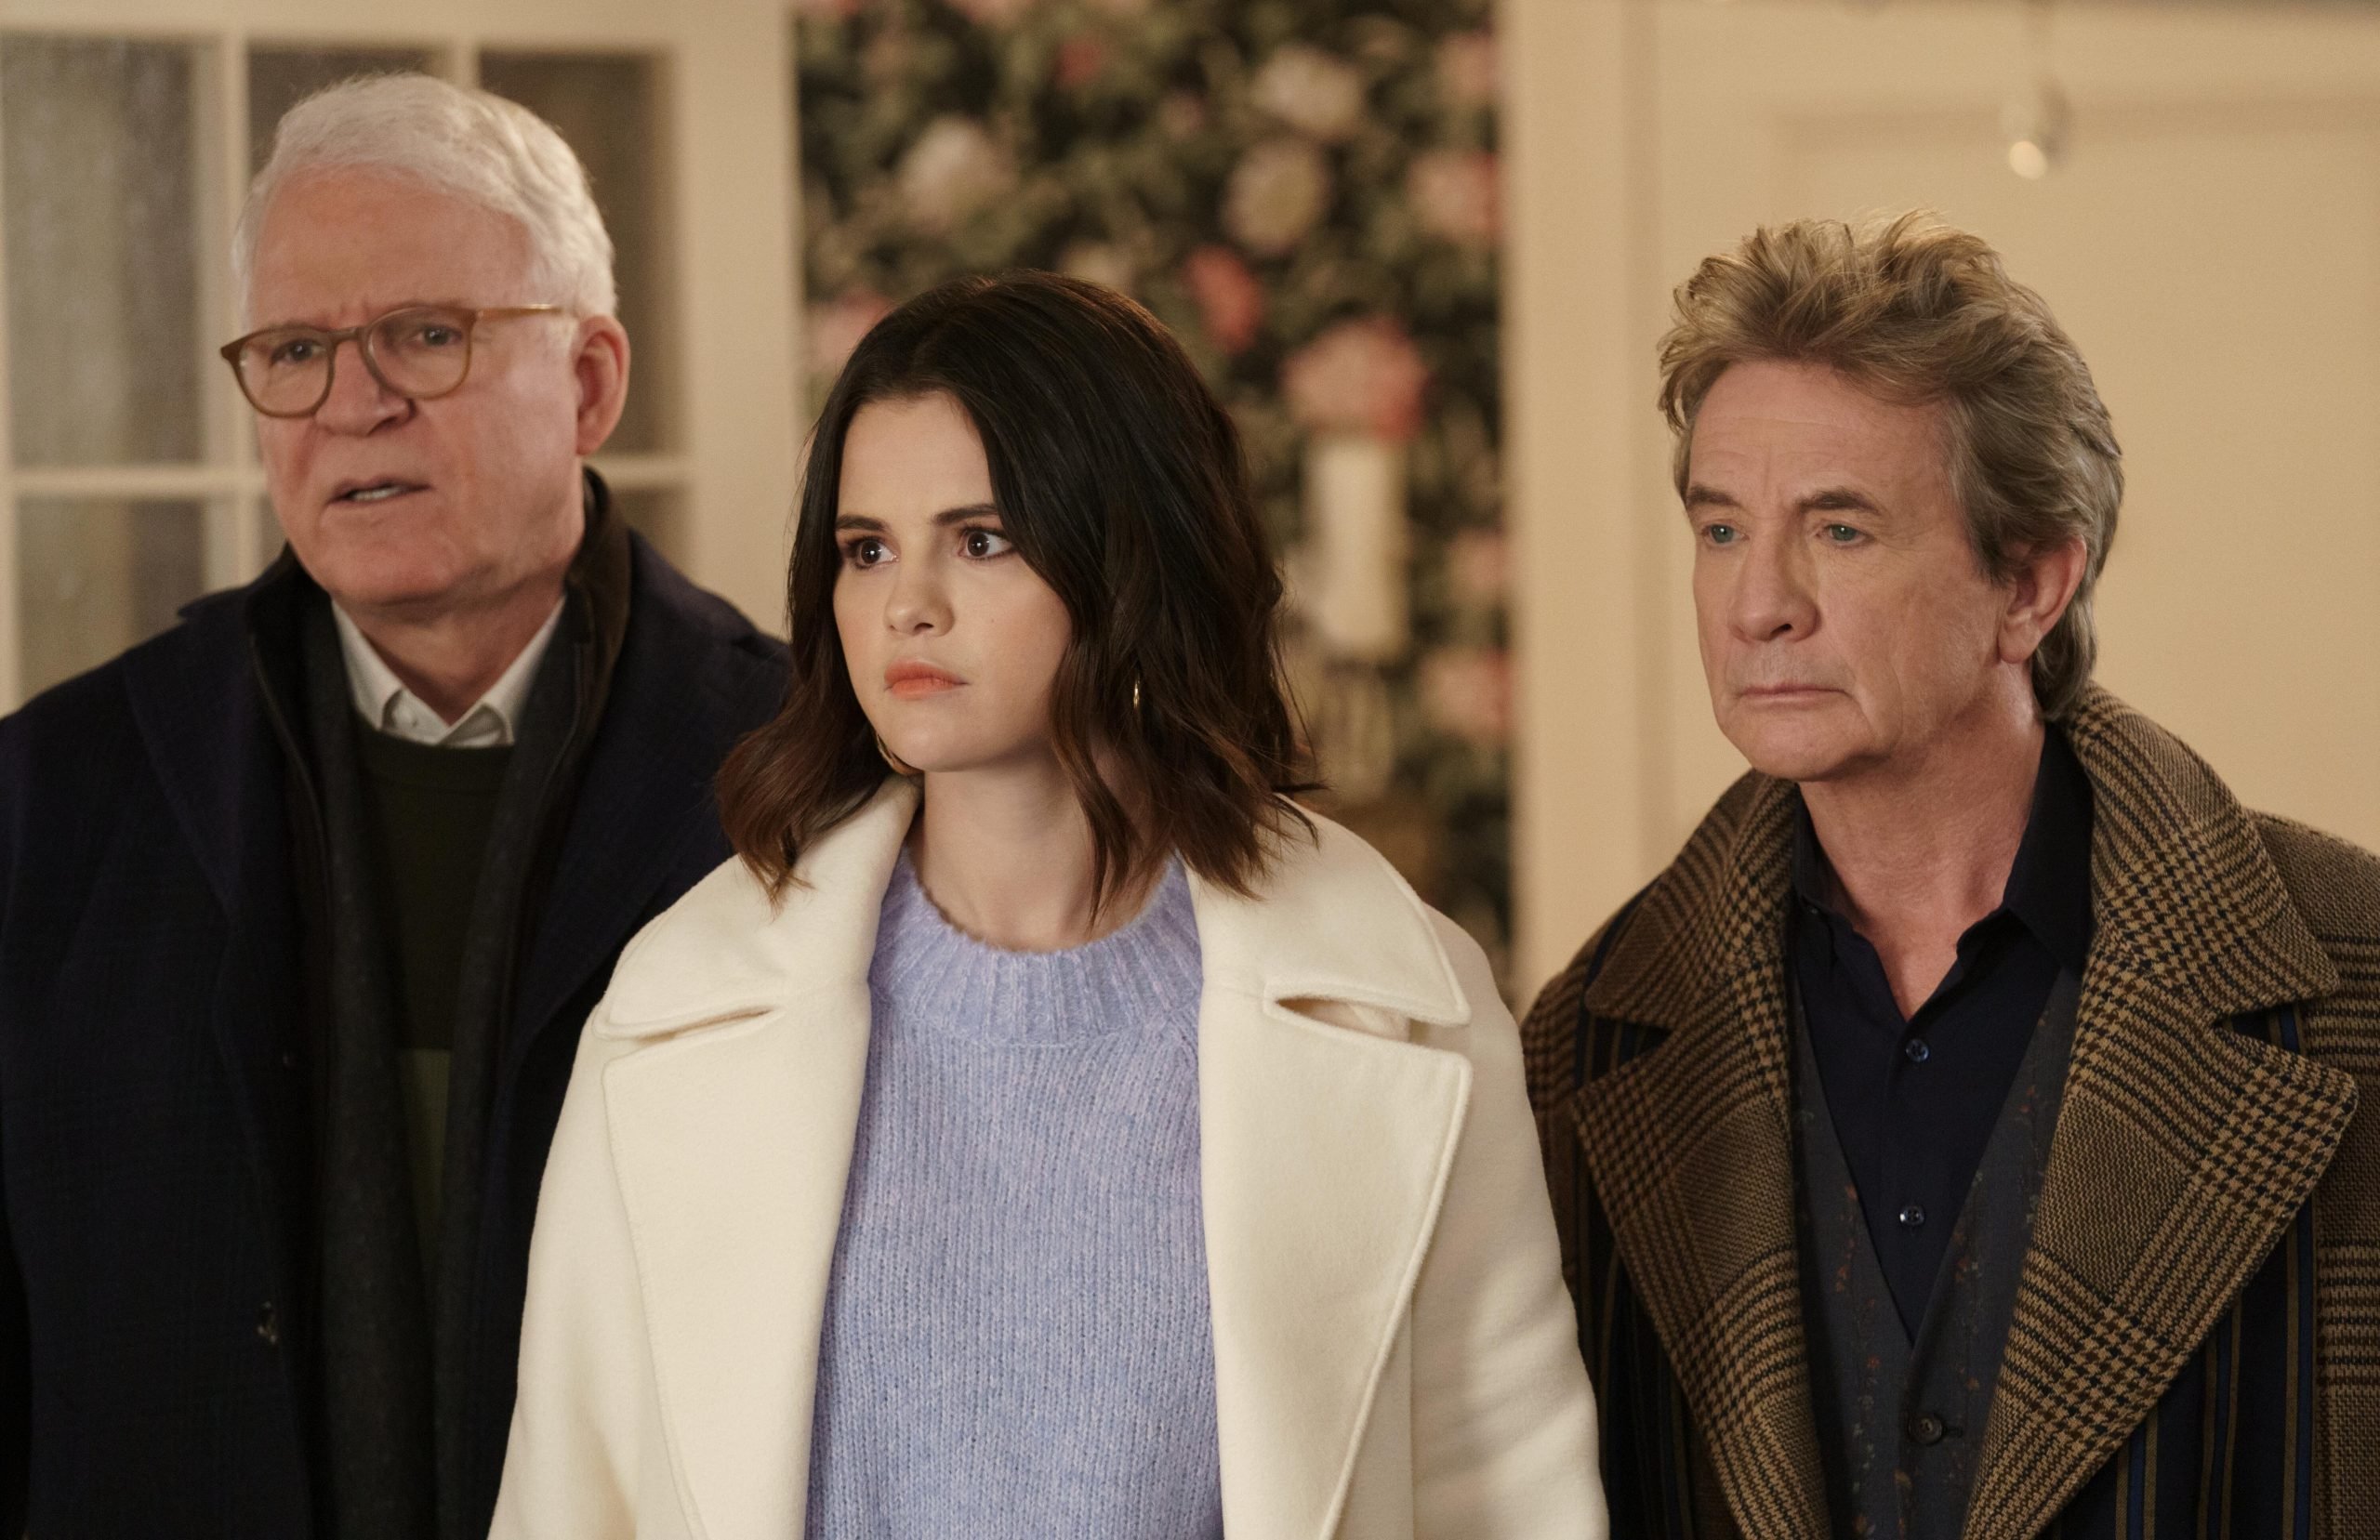 A still of Charles, Mabel, and Oliver from ‘Only Murders in the Building’ Season 2 showing how Selena Gomez’s height is less than Steve Martin’s and Martin Short’s